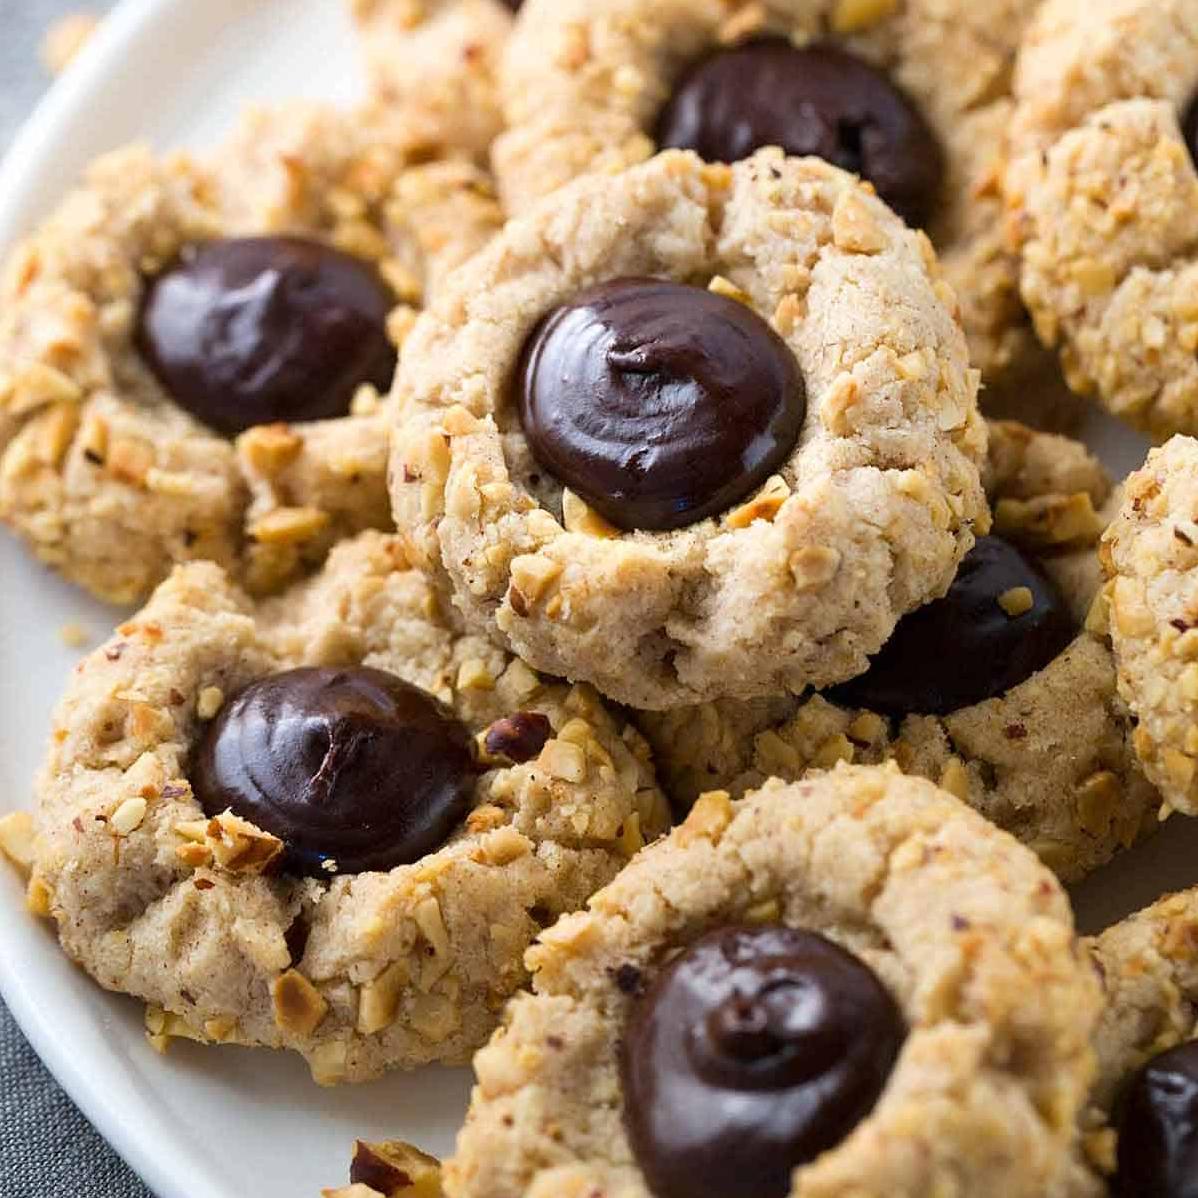  Sweet, nutty, and gluten-free- what's not to love?